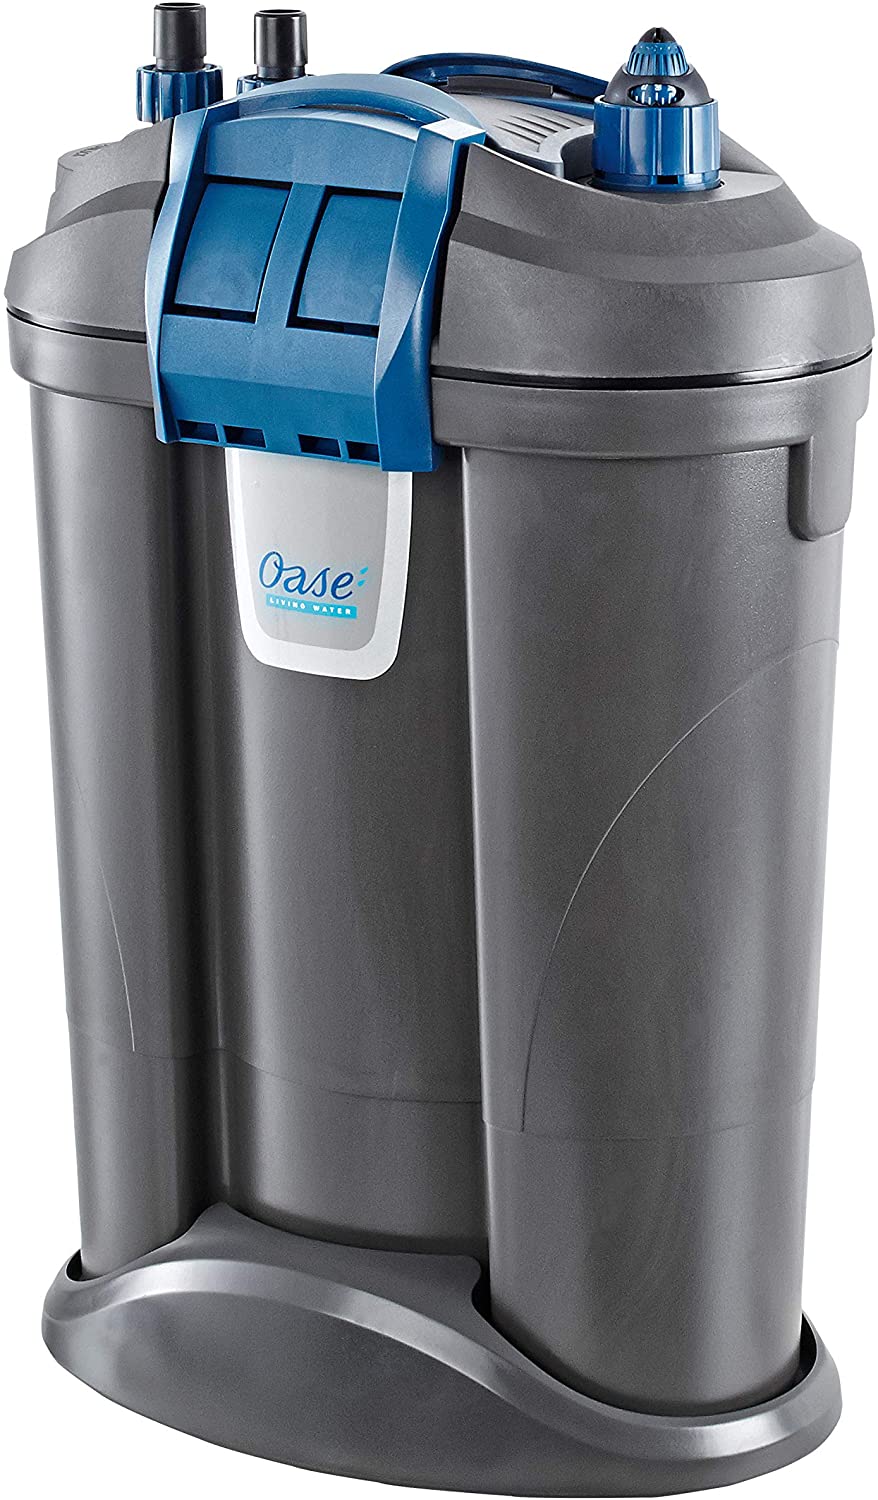 OASE FiltoSmart Thermo 300 Canister Filter w/ Heater - Free Shipping